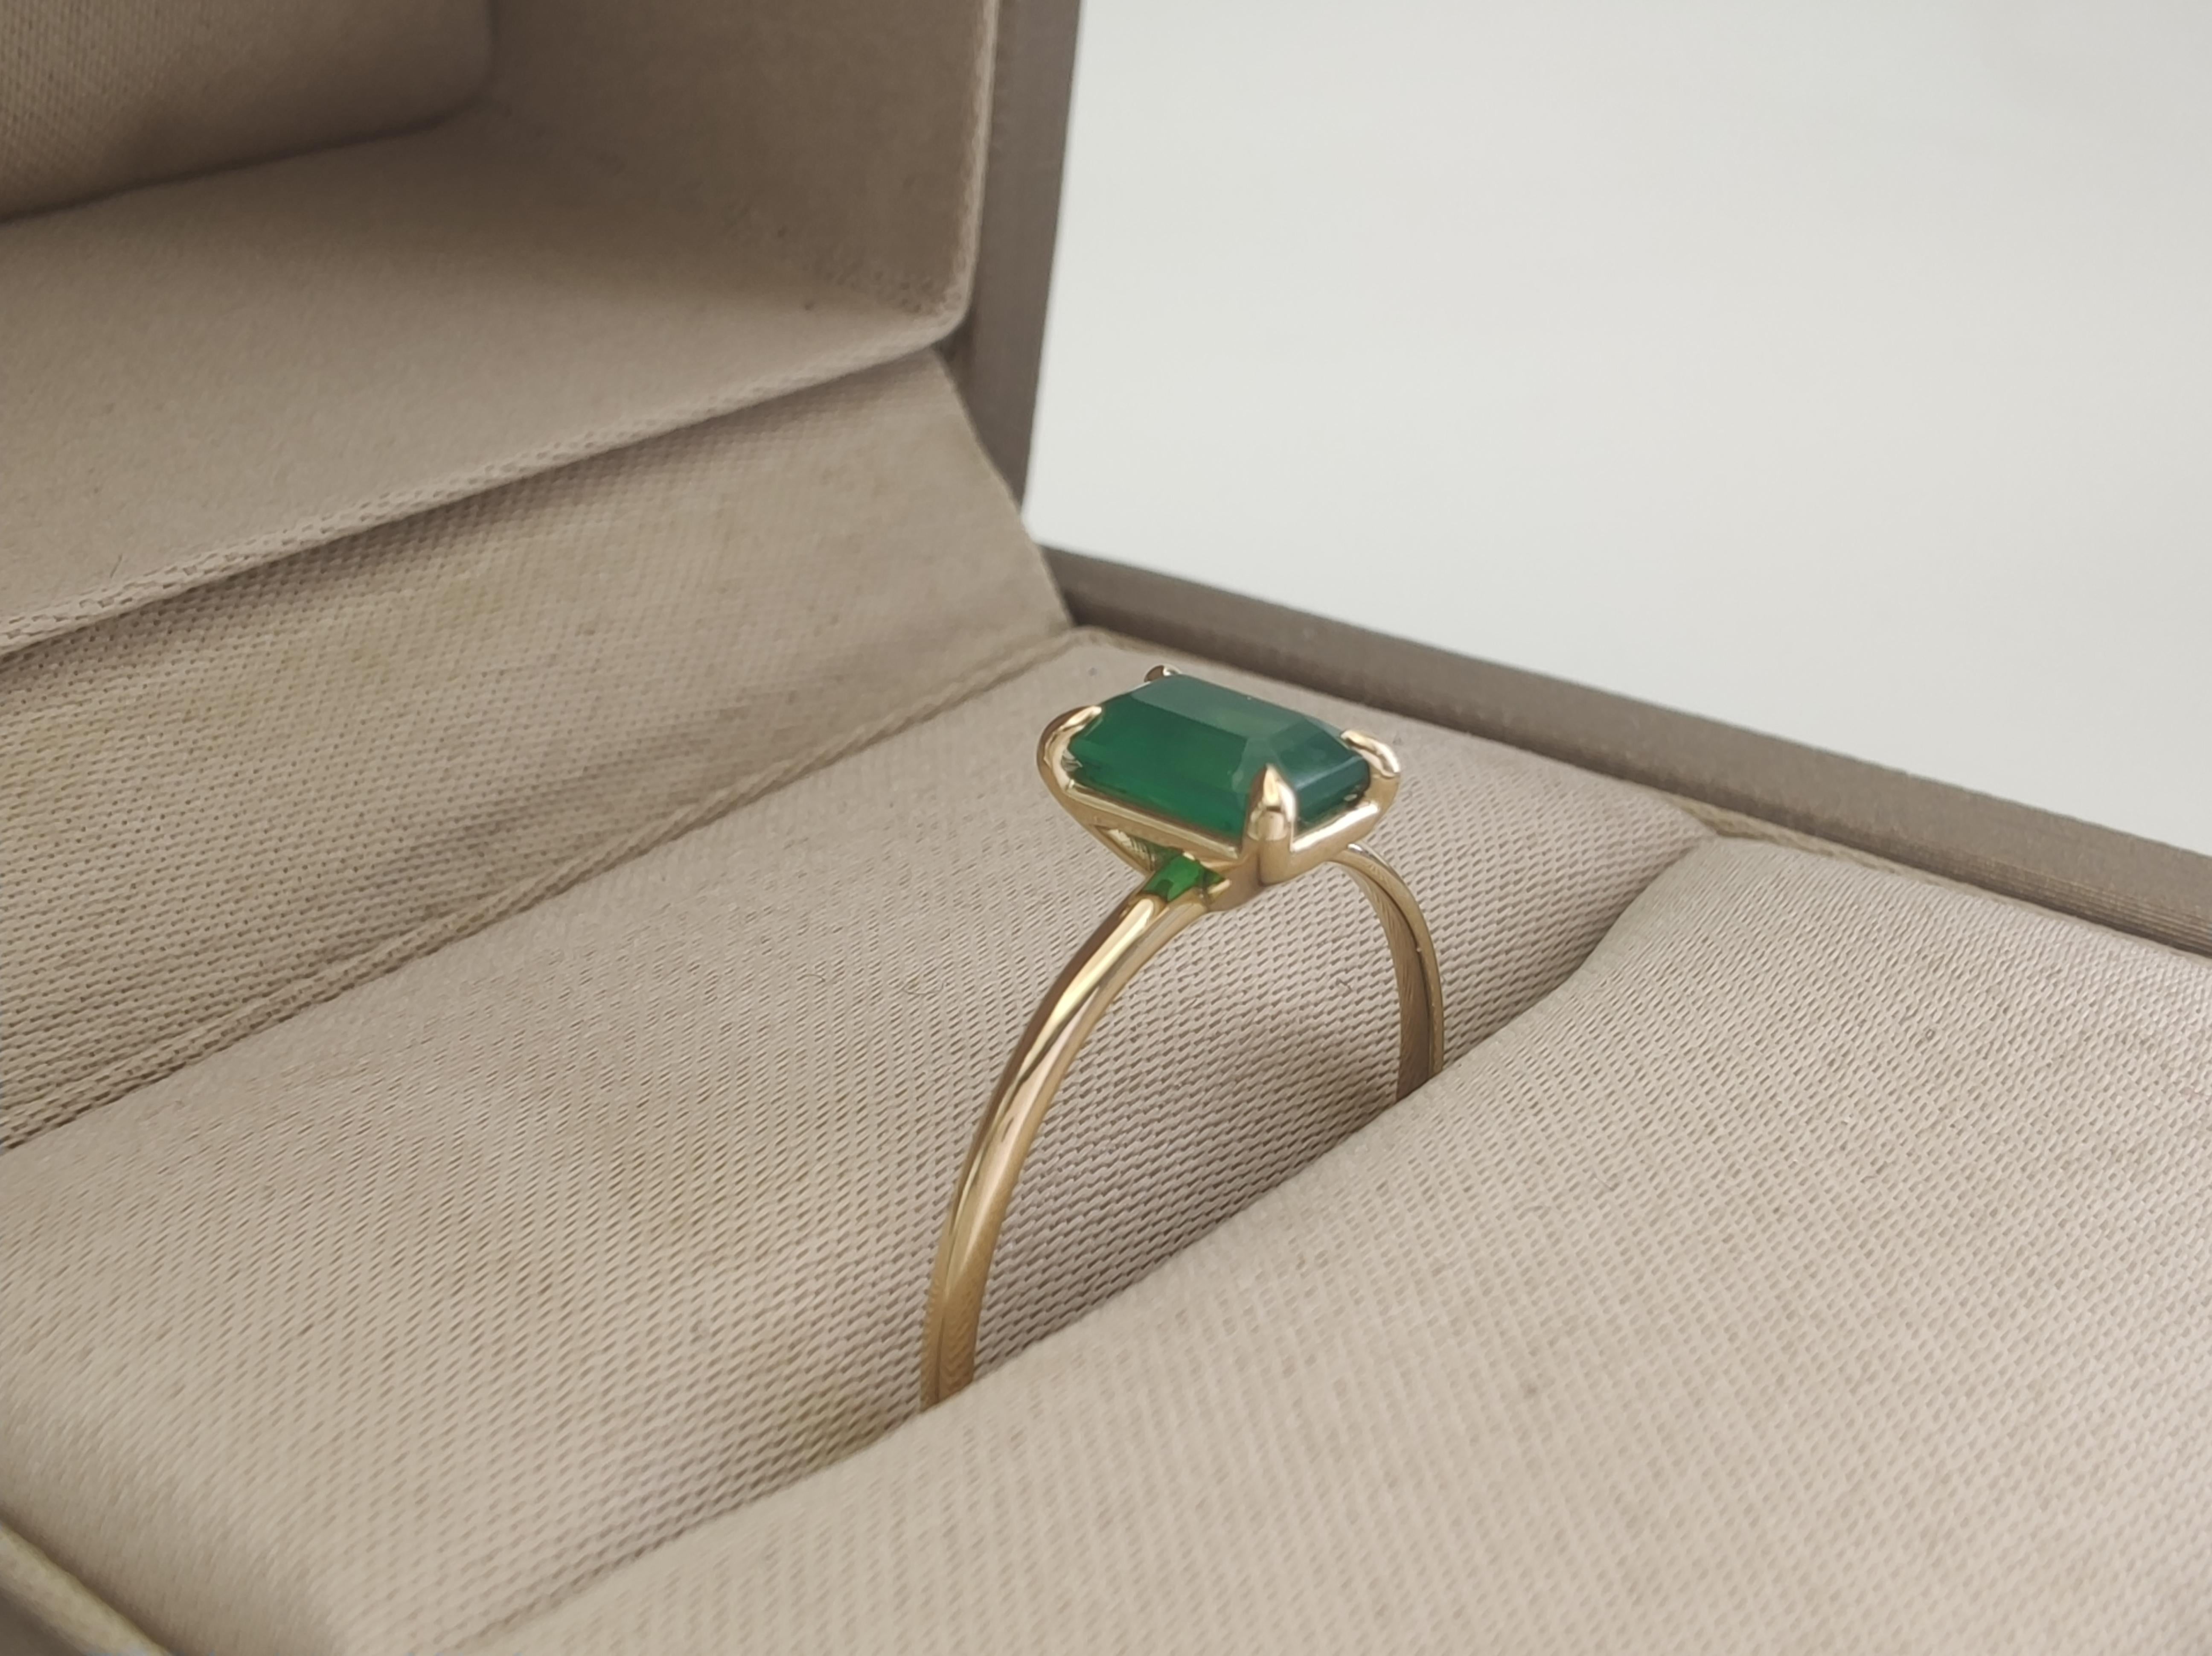 0.56ct Emerald in 18K Gold Minimalist Everyday Ring for Elegance and Versatility For Sale 6